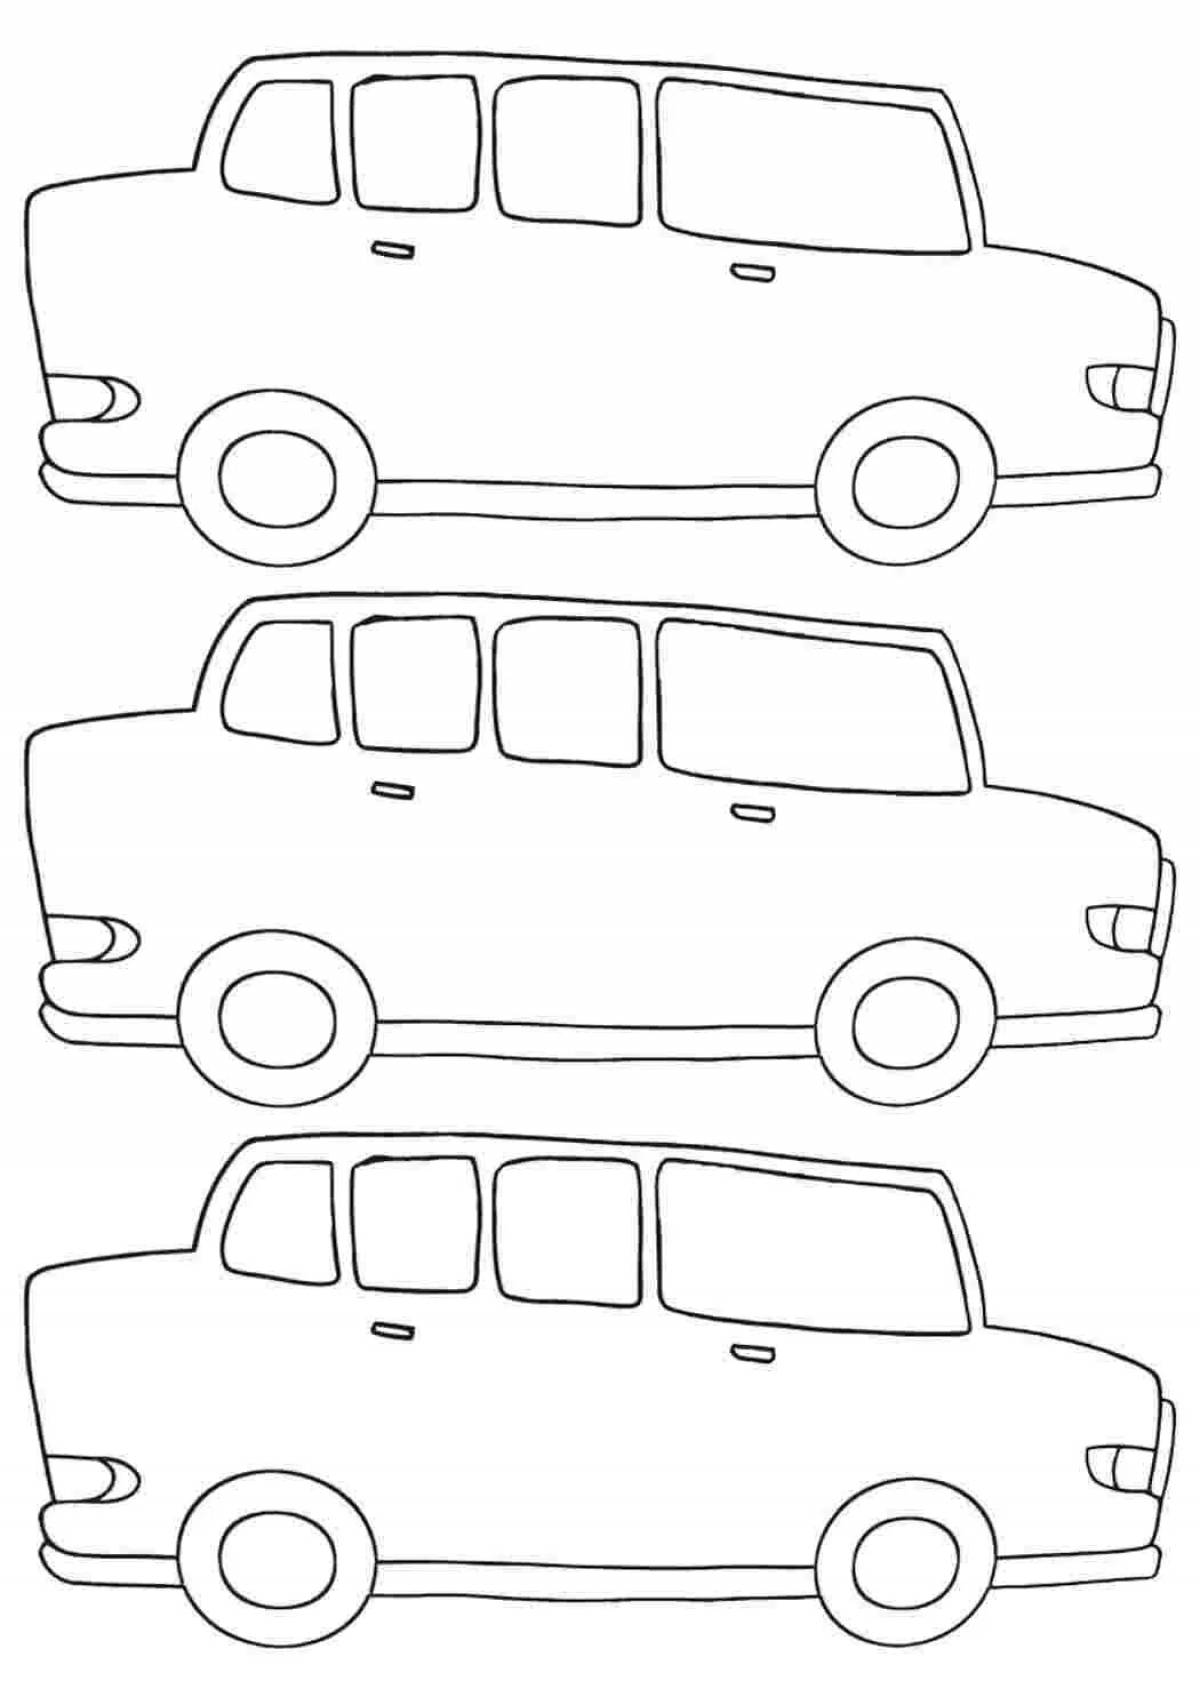 Cute limousine coloring book for kids